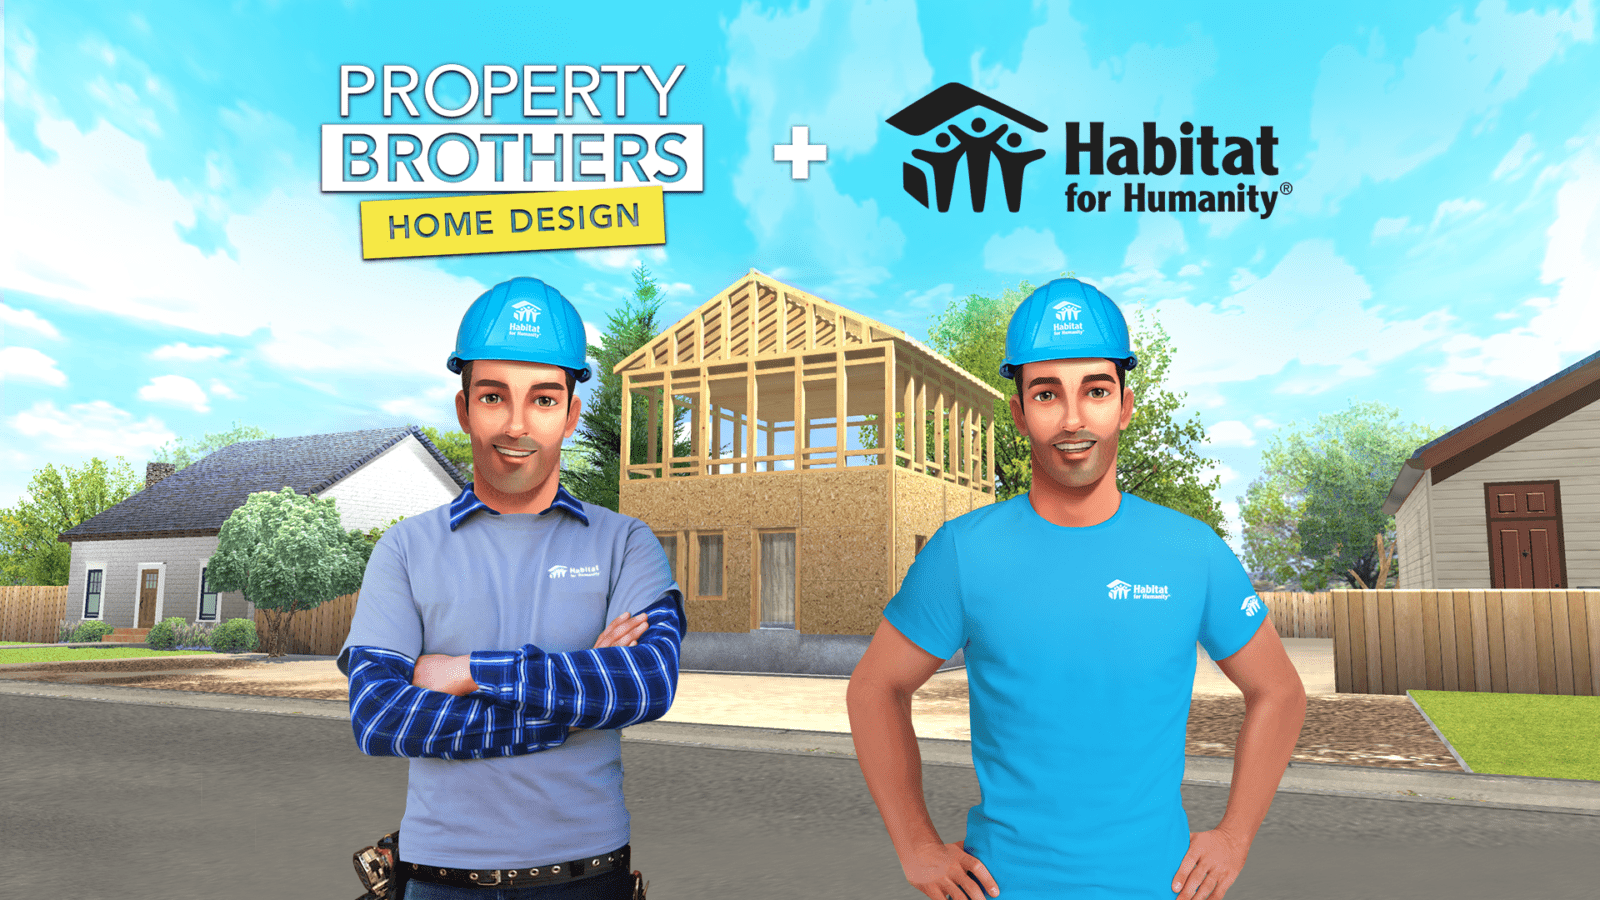 Property Brothers Home Design Game x Habitat for Humanity Fundraiser